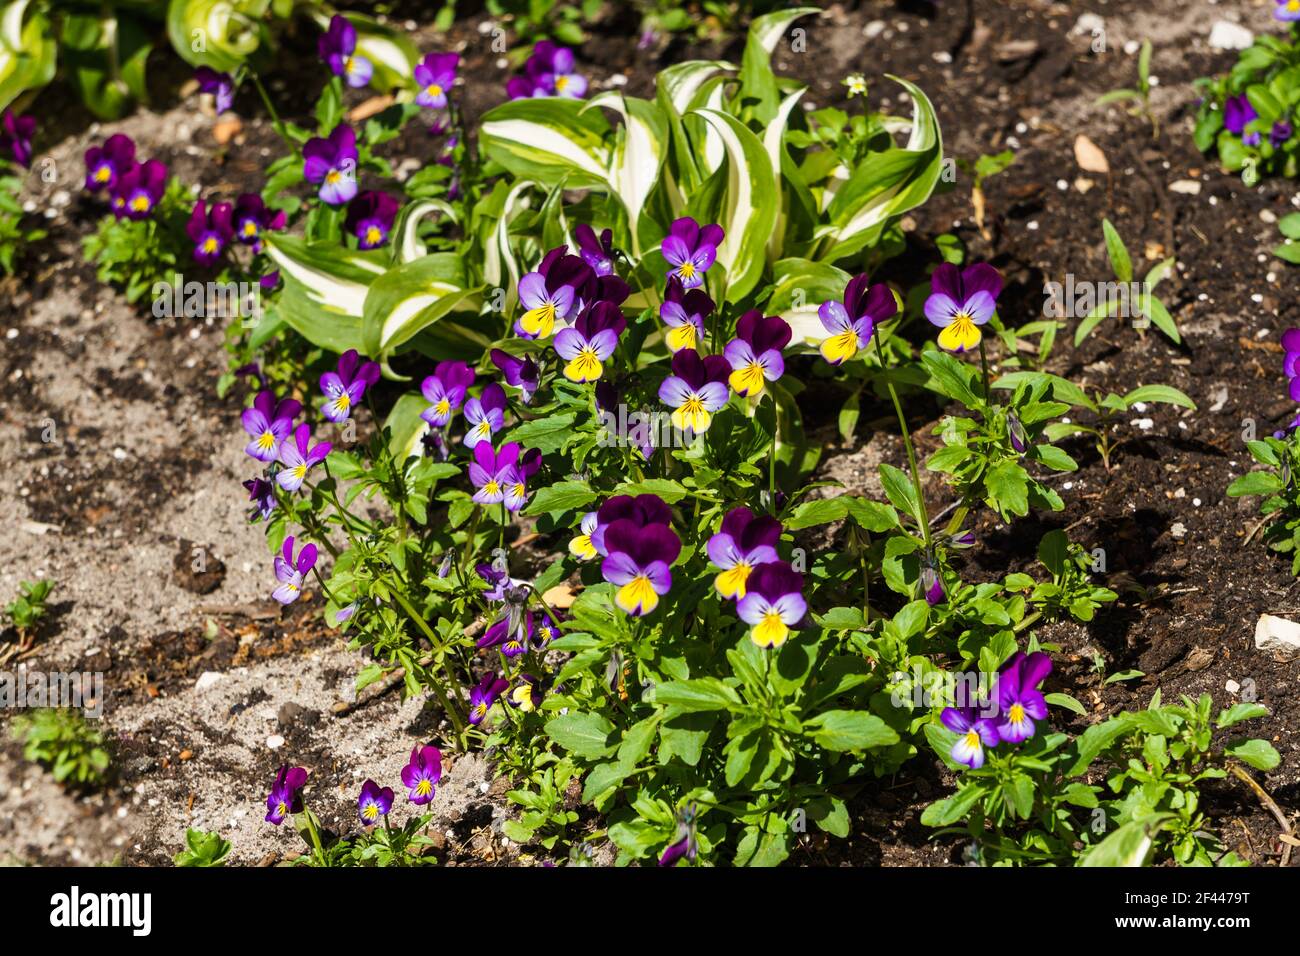 Pansies flowers in a flower bed. Very delicate and interesting colors Stock Photo